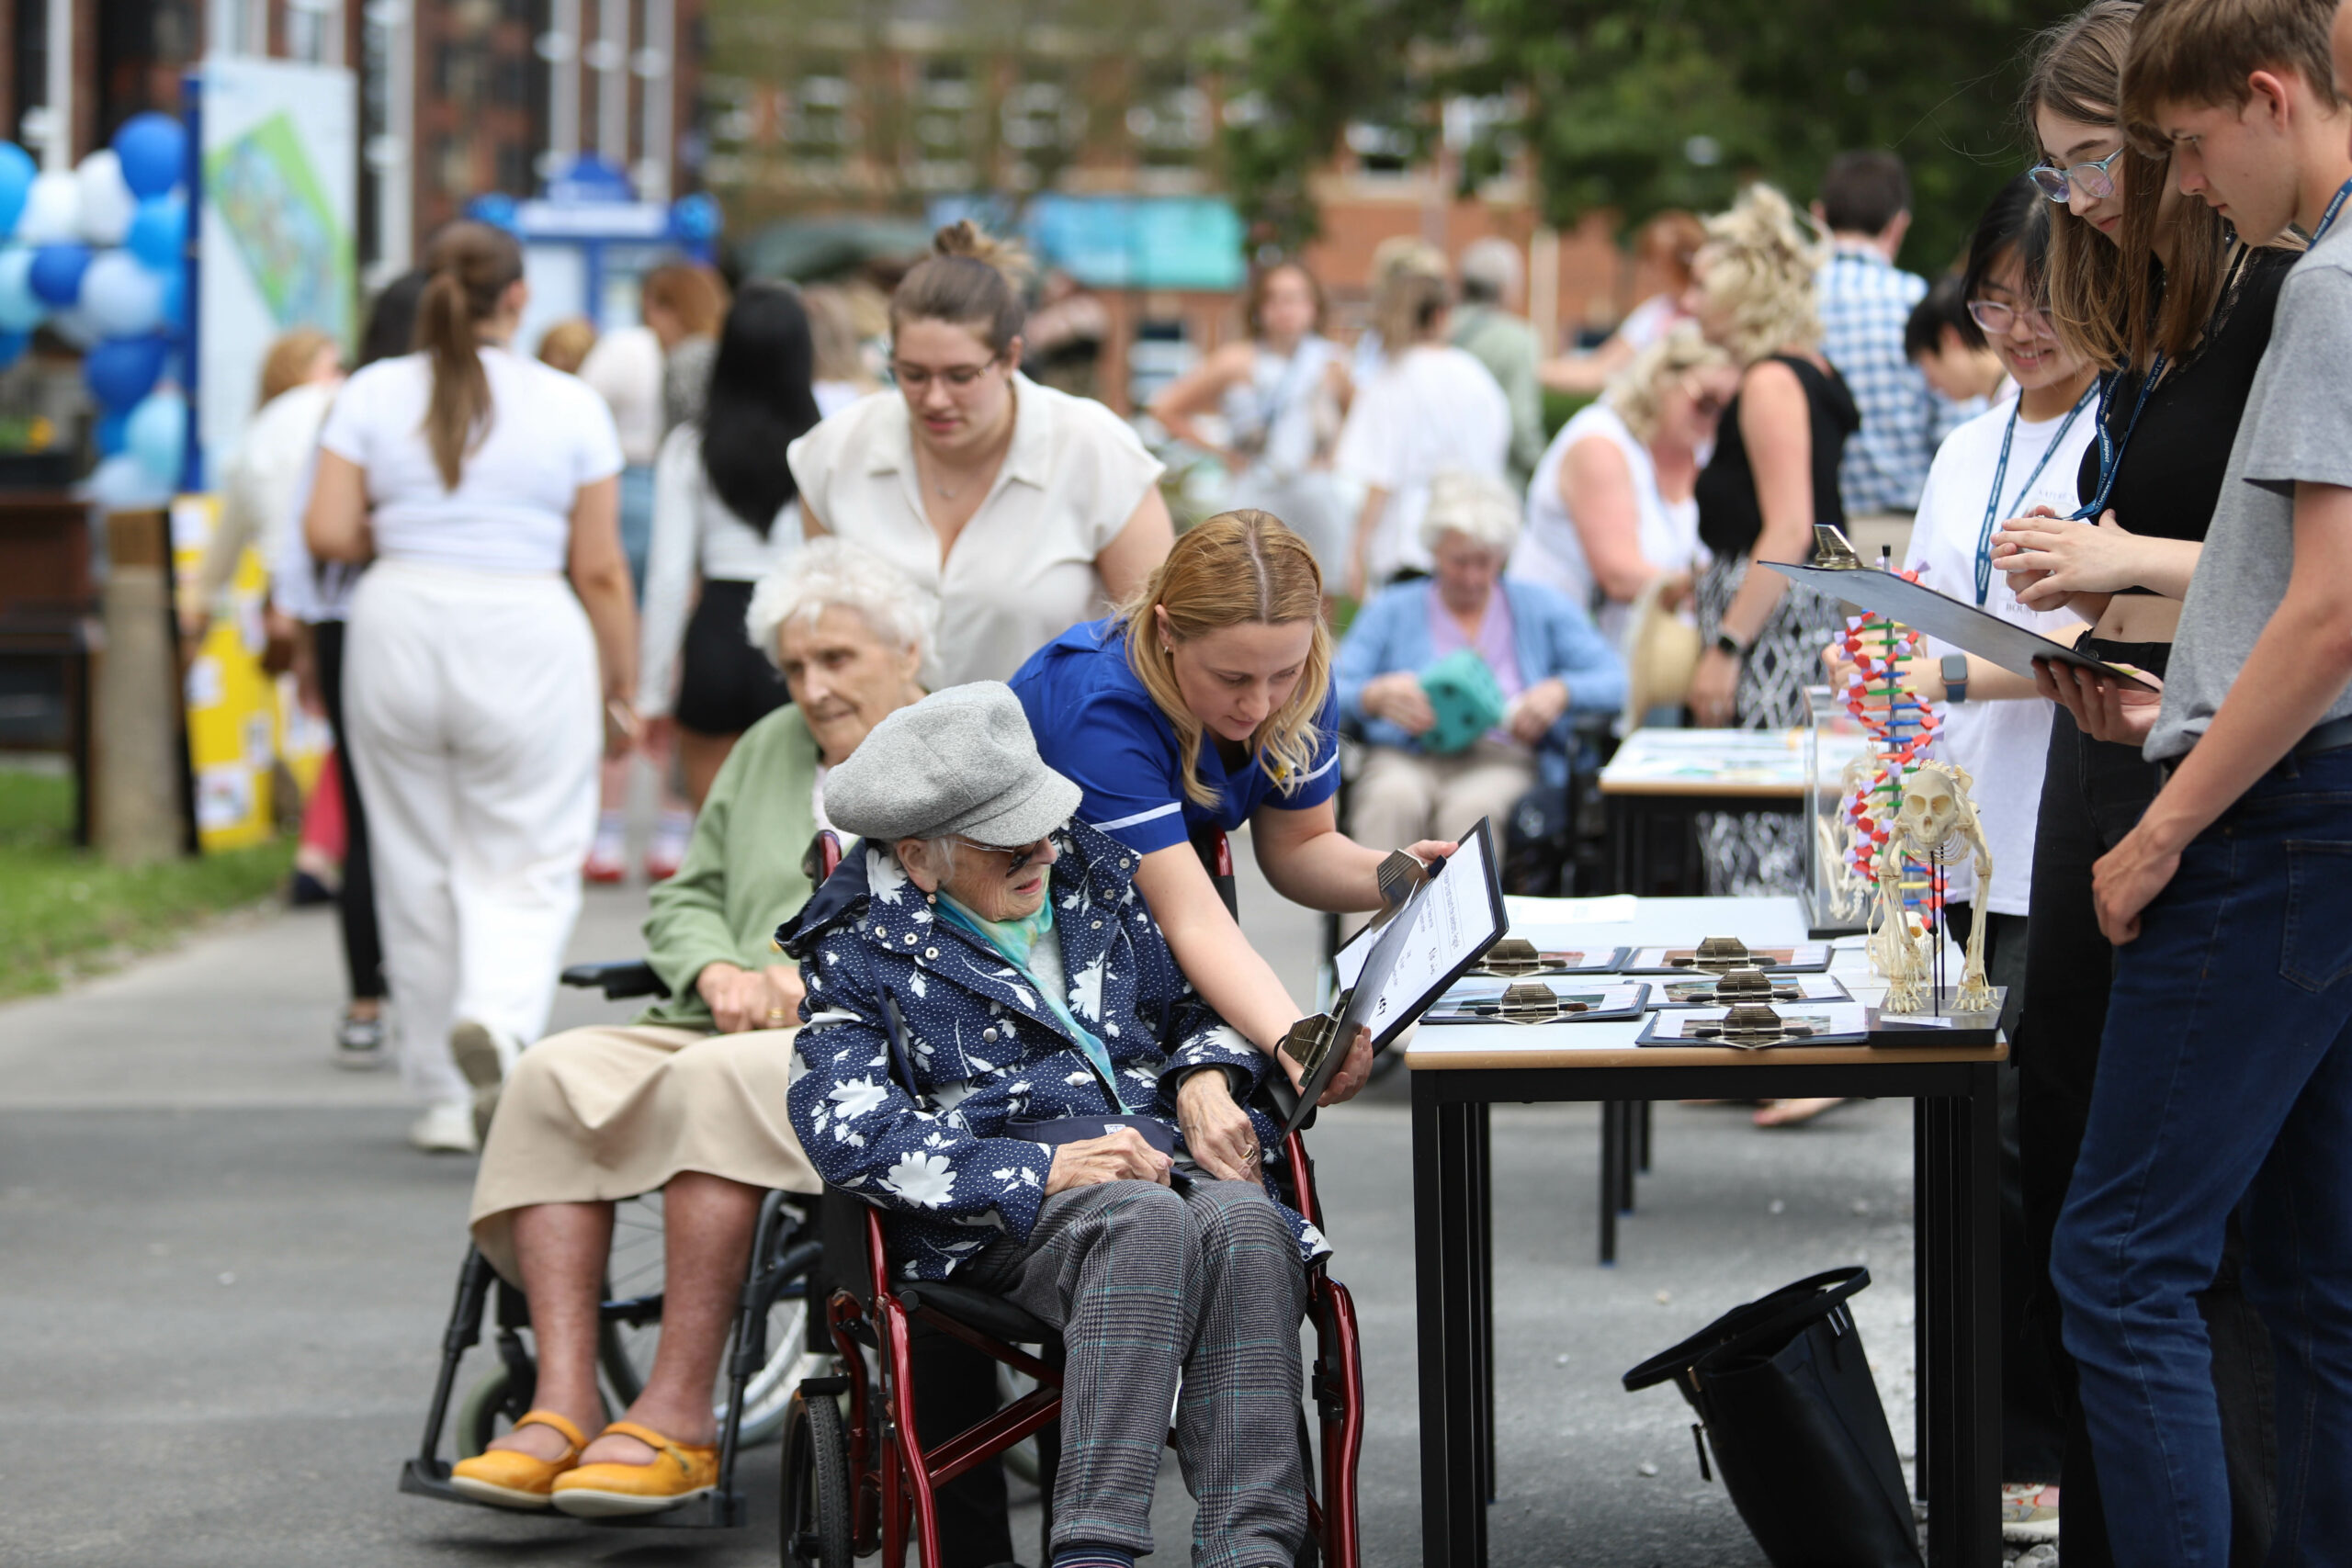 New College brings together young and old with its summer fayre